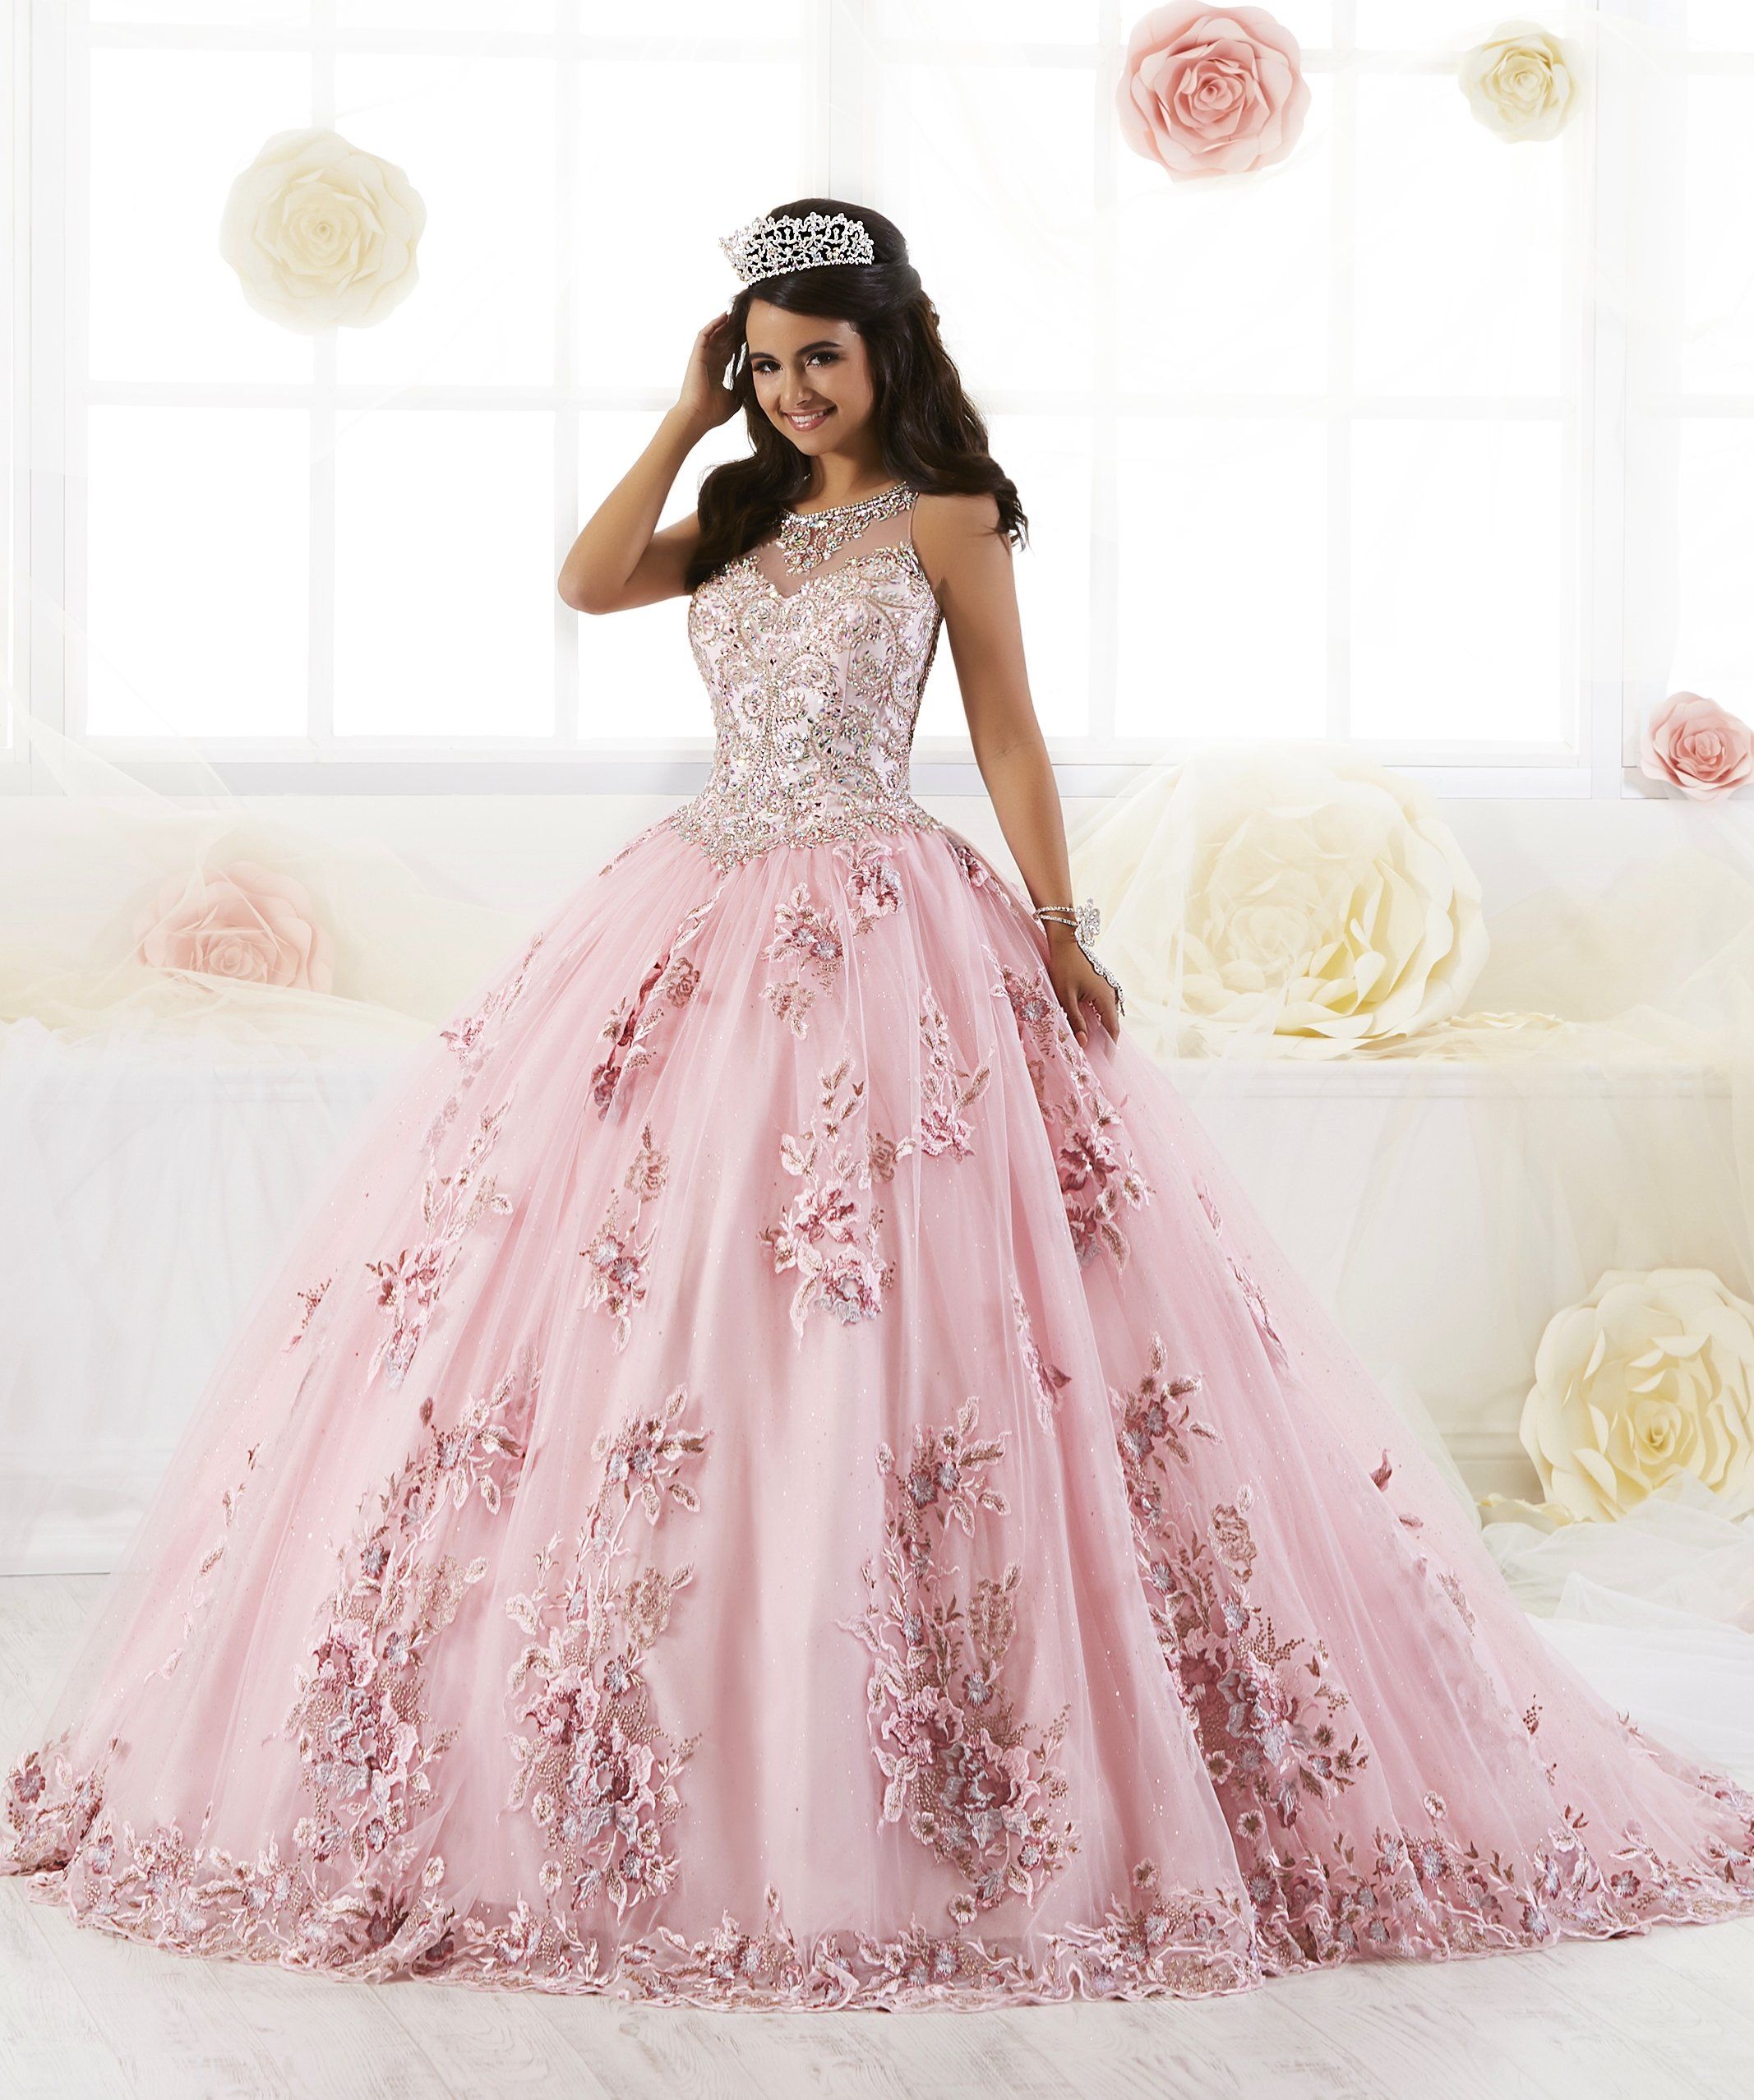 Floral Applique Quinceanera Dress by House of Wu 26884